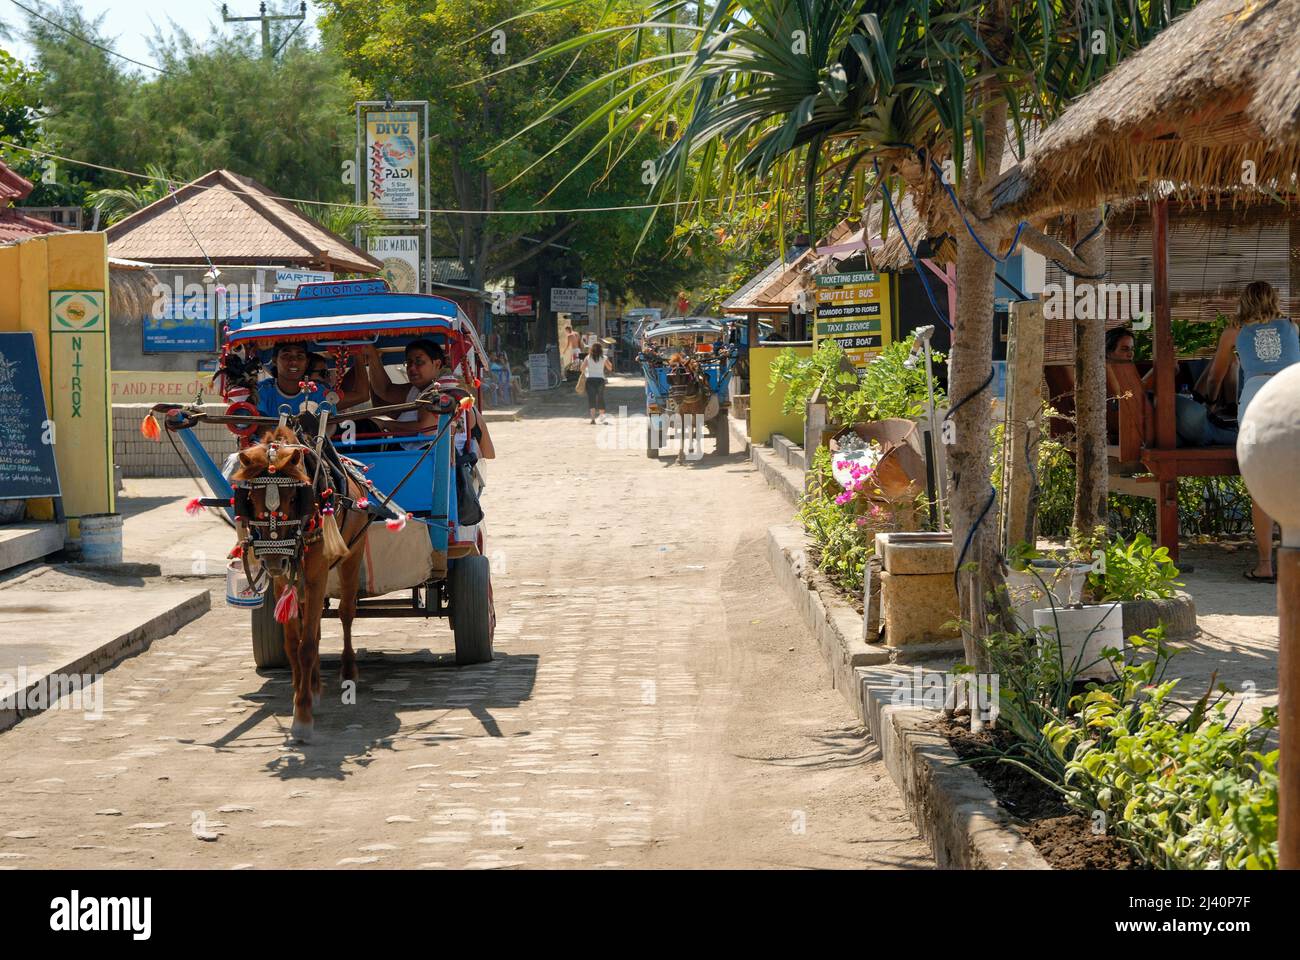 The 'main street' on Gili Trawangan, which has no cars.  Cimodos, horse drawn carts, are the main form of transport. Stock Photo